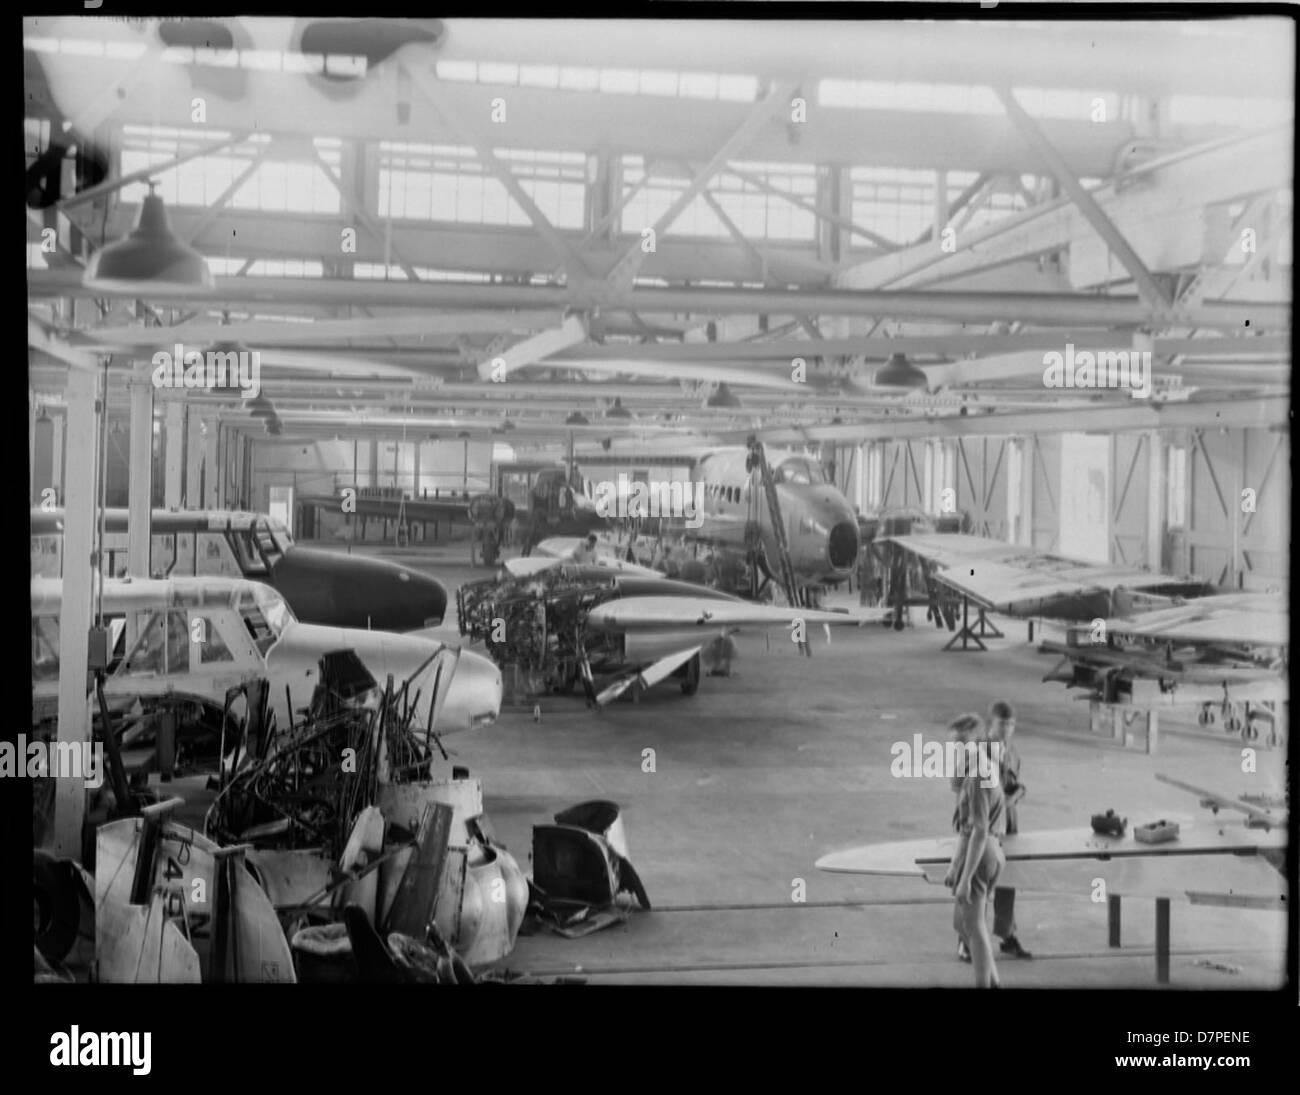 The general view of aircraft in workshops Stock Photo